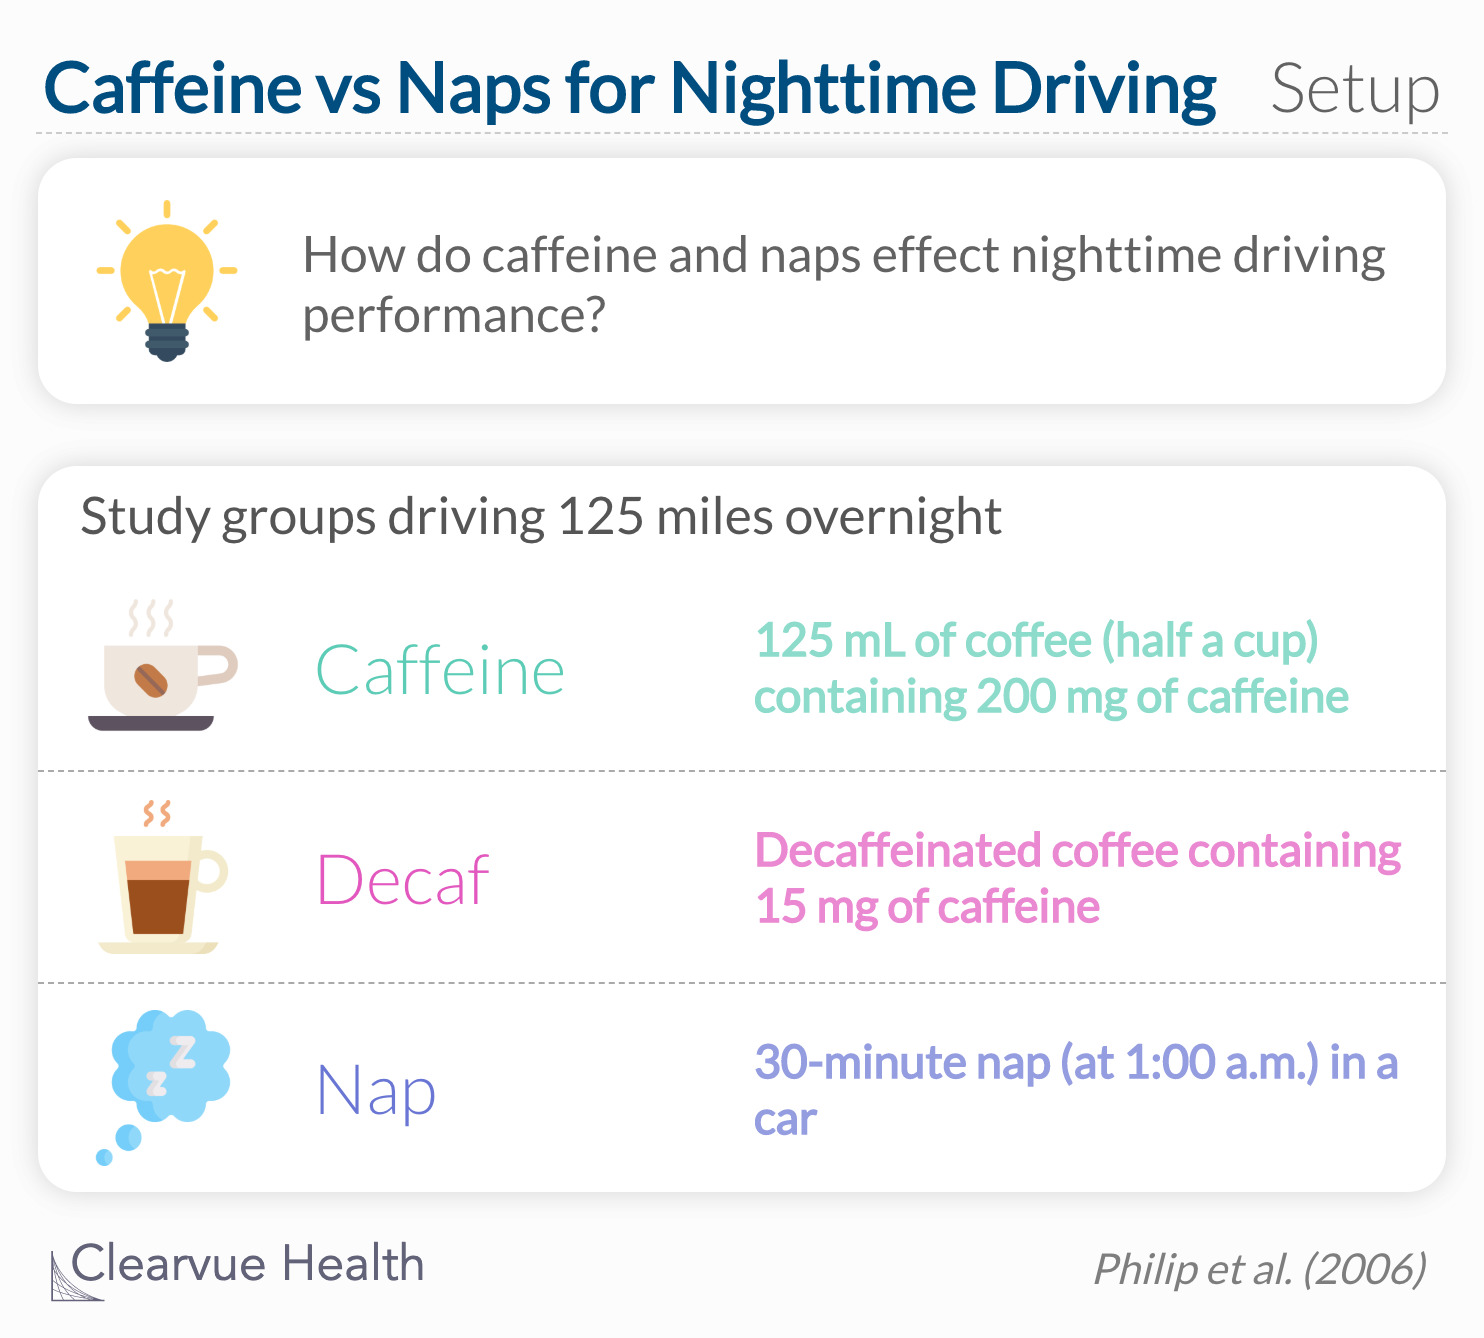 How do caffeine and naps effect nighttime driving performance?